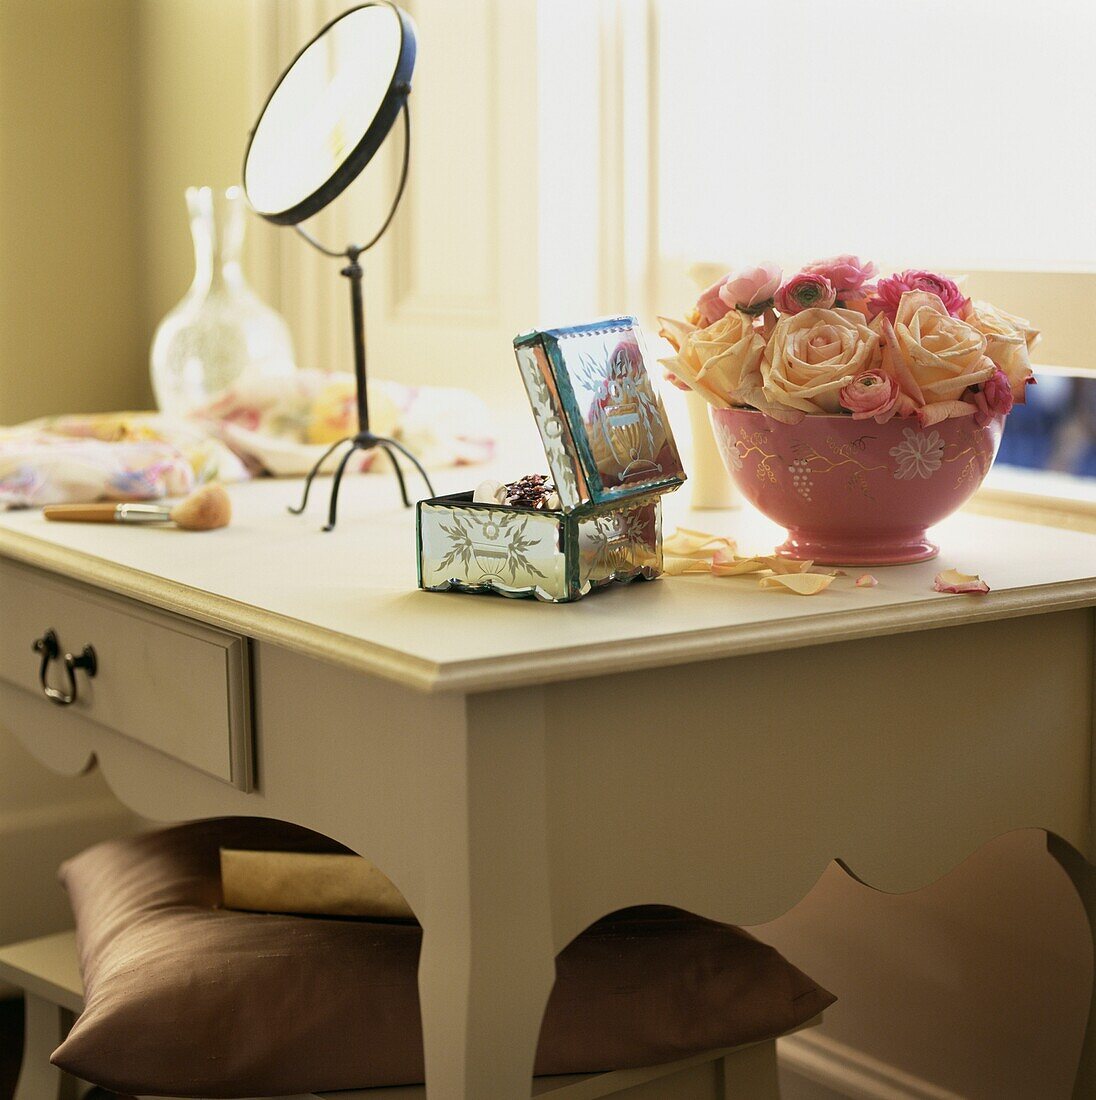 Circular freestanding mirror on painted dressing table with roses